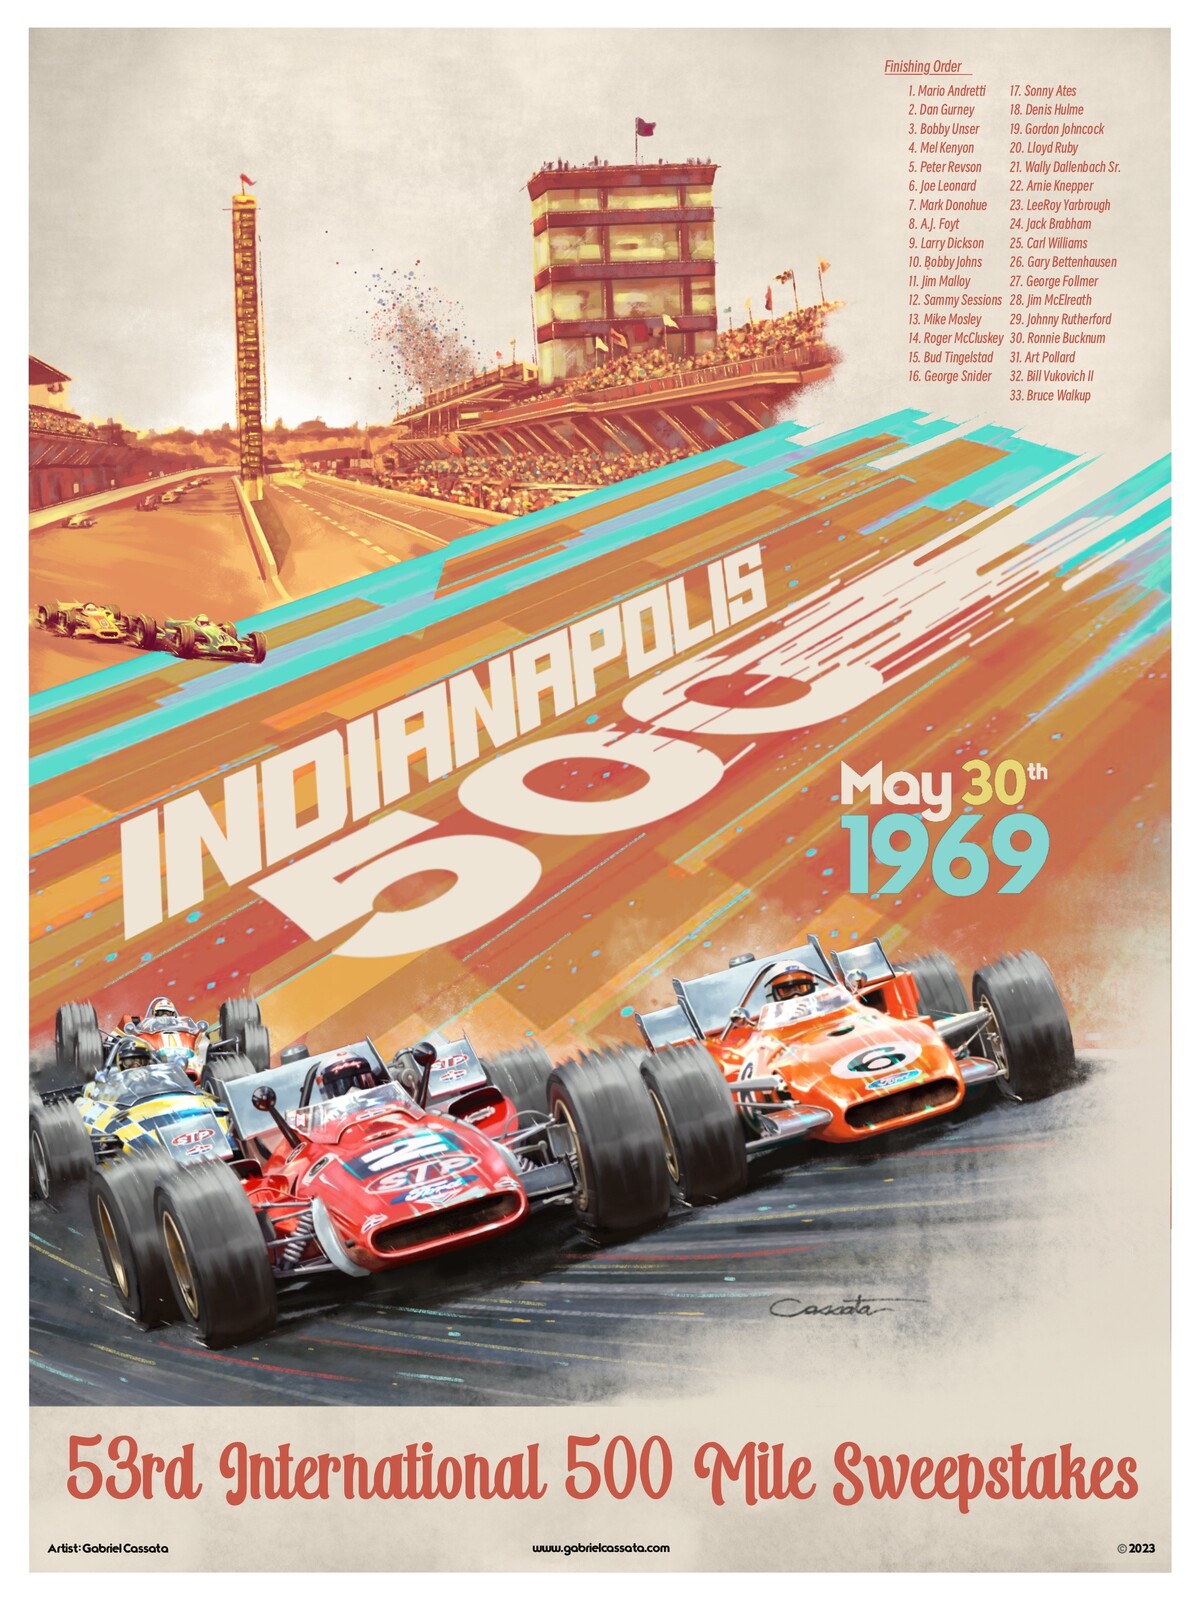 1969 Indianapolis 500 poster